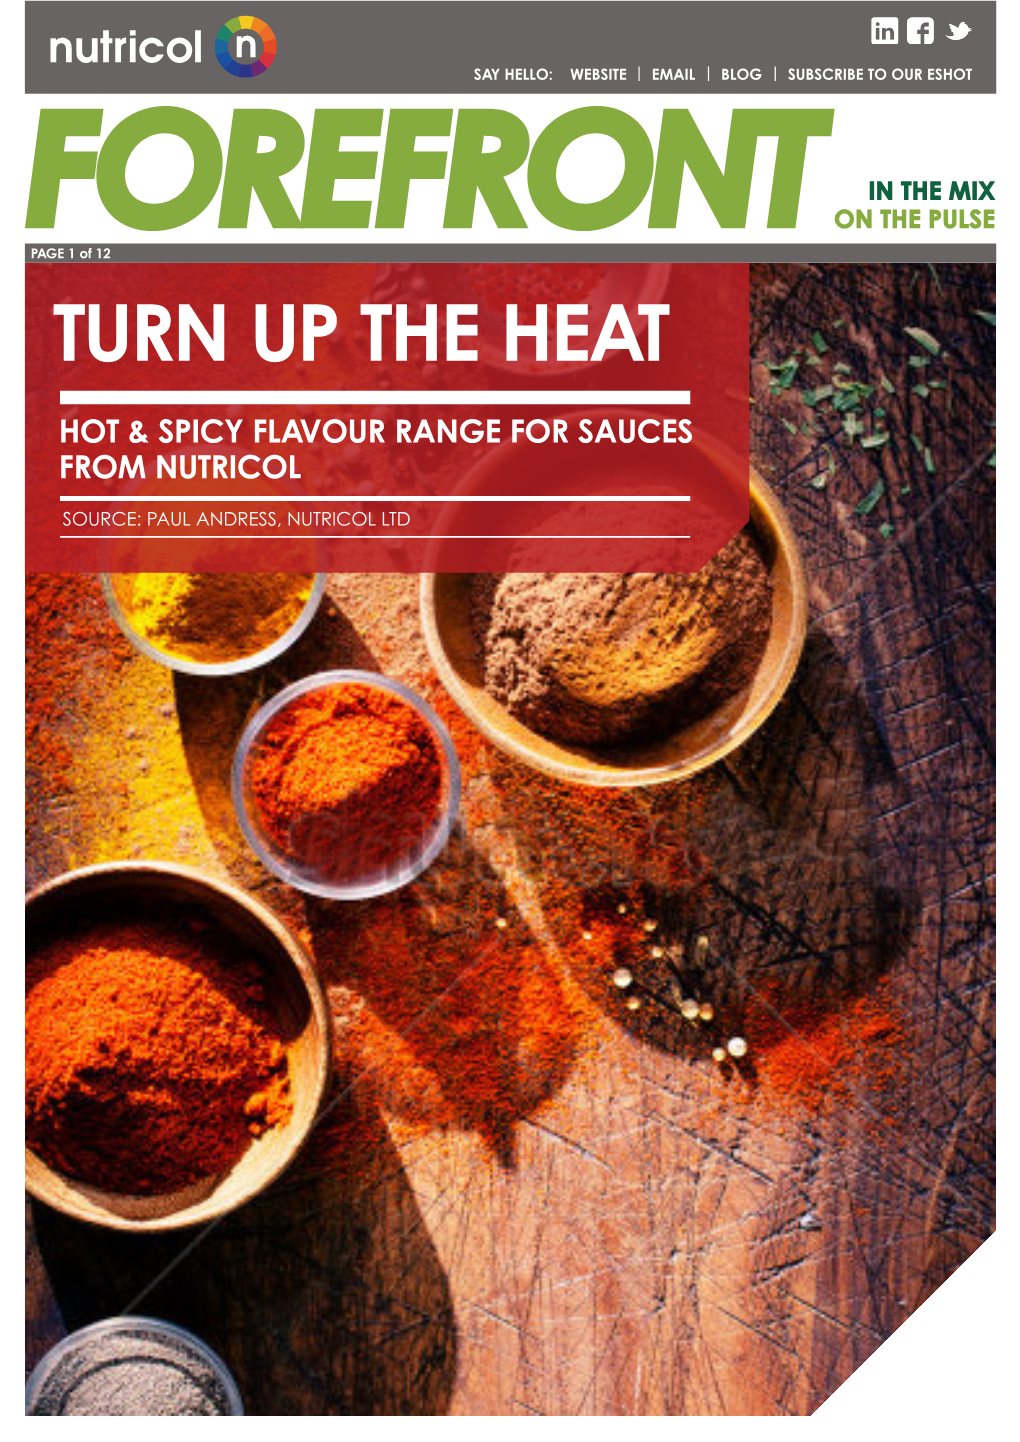 Turn up the Heat Hot & Spicy Flavour Range for Sauces From